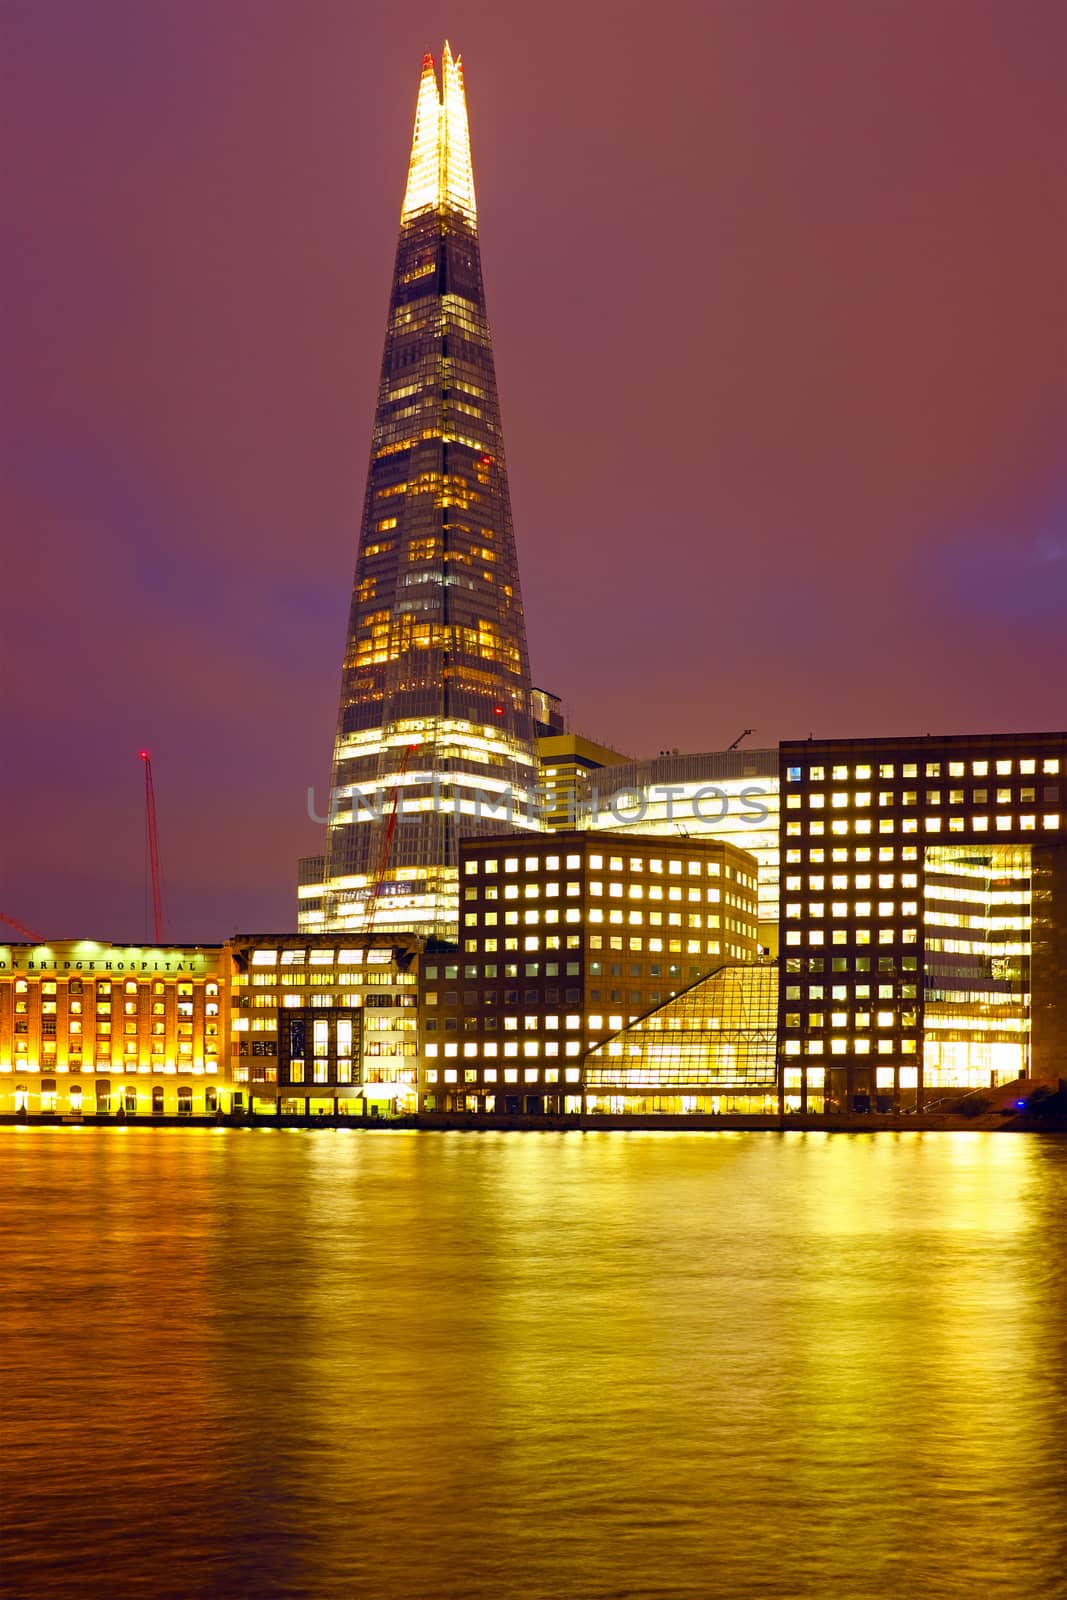 London shard at night in the UK by devy